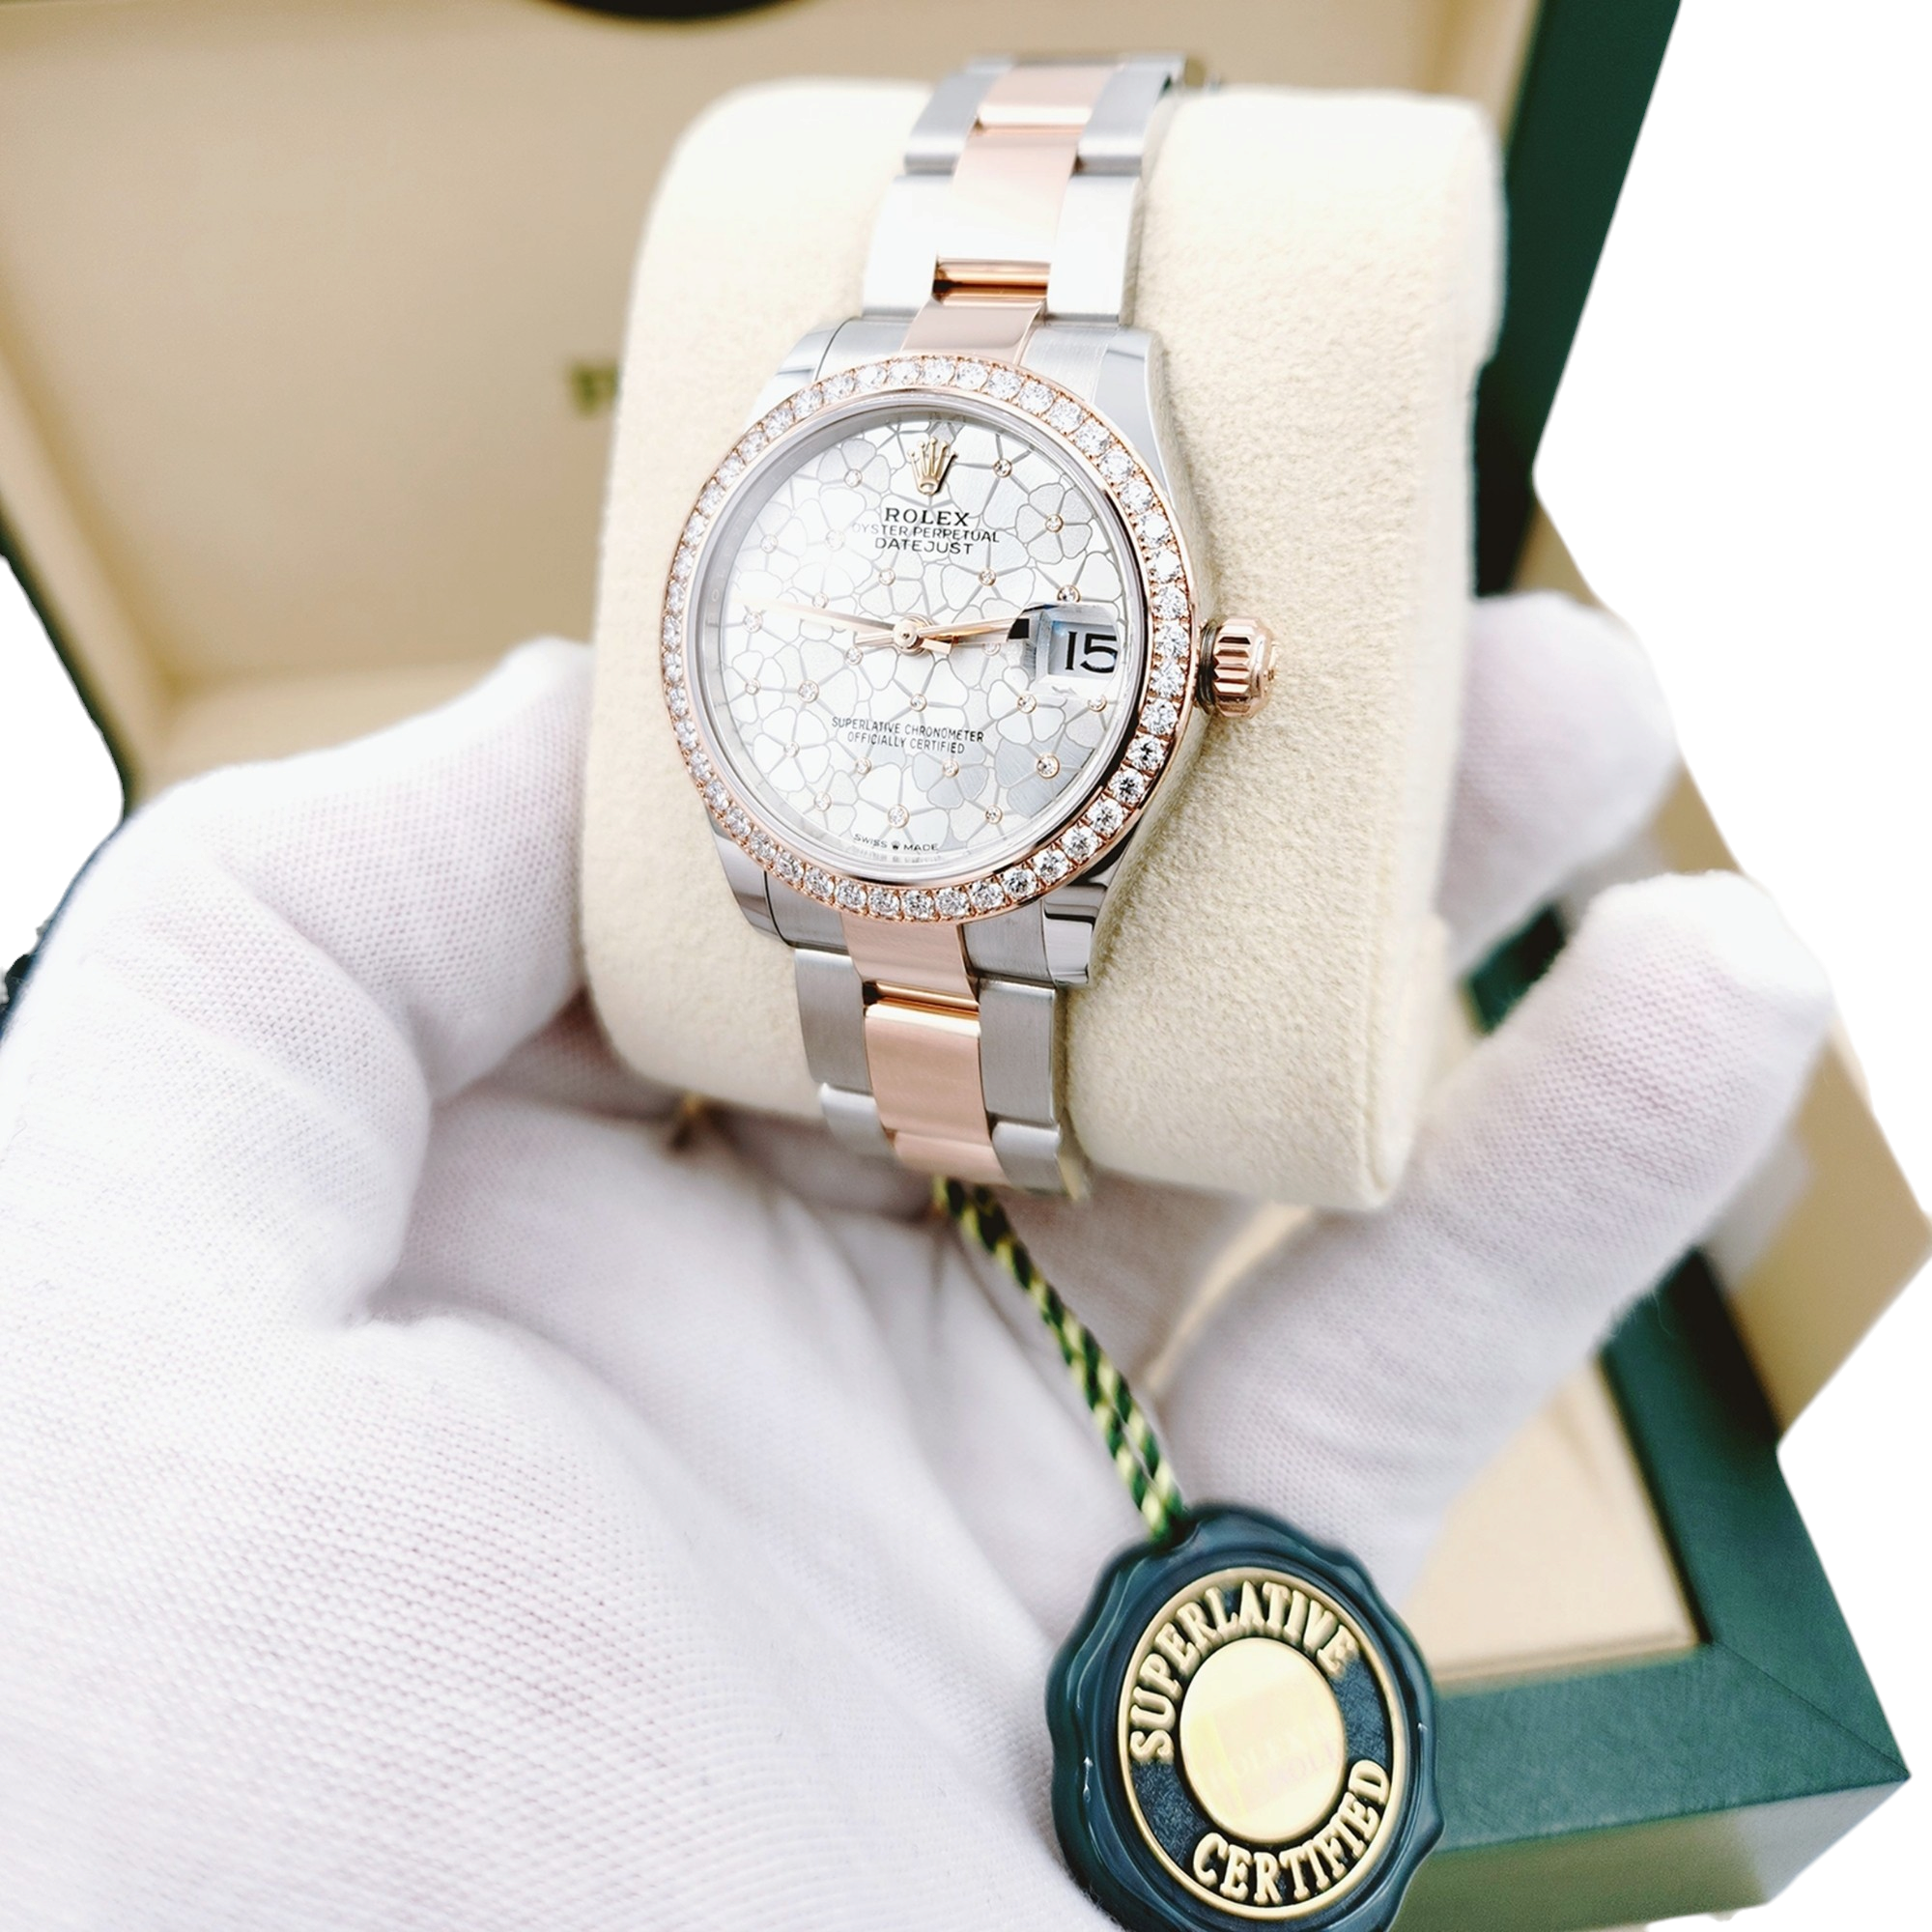 *2023 Ladies Rolex DateJust 31mm Midsize Two Tone 18K Rose Gold / Stainless Steel Watch with Silver Floral Motif Dial and Diamond Bezel. (NEW 278381RBR)